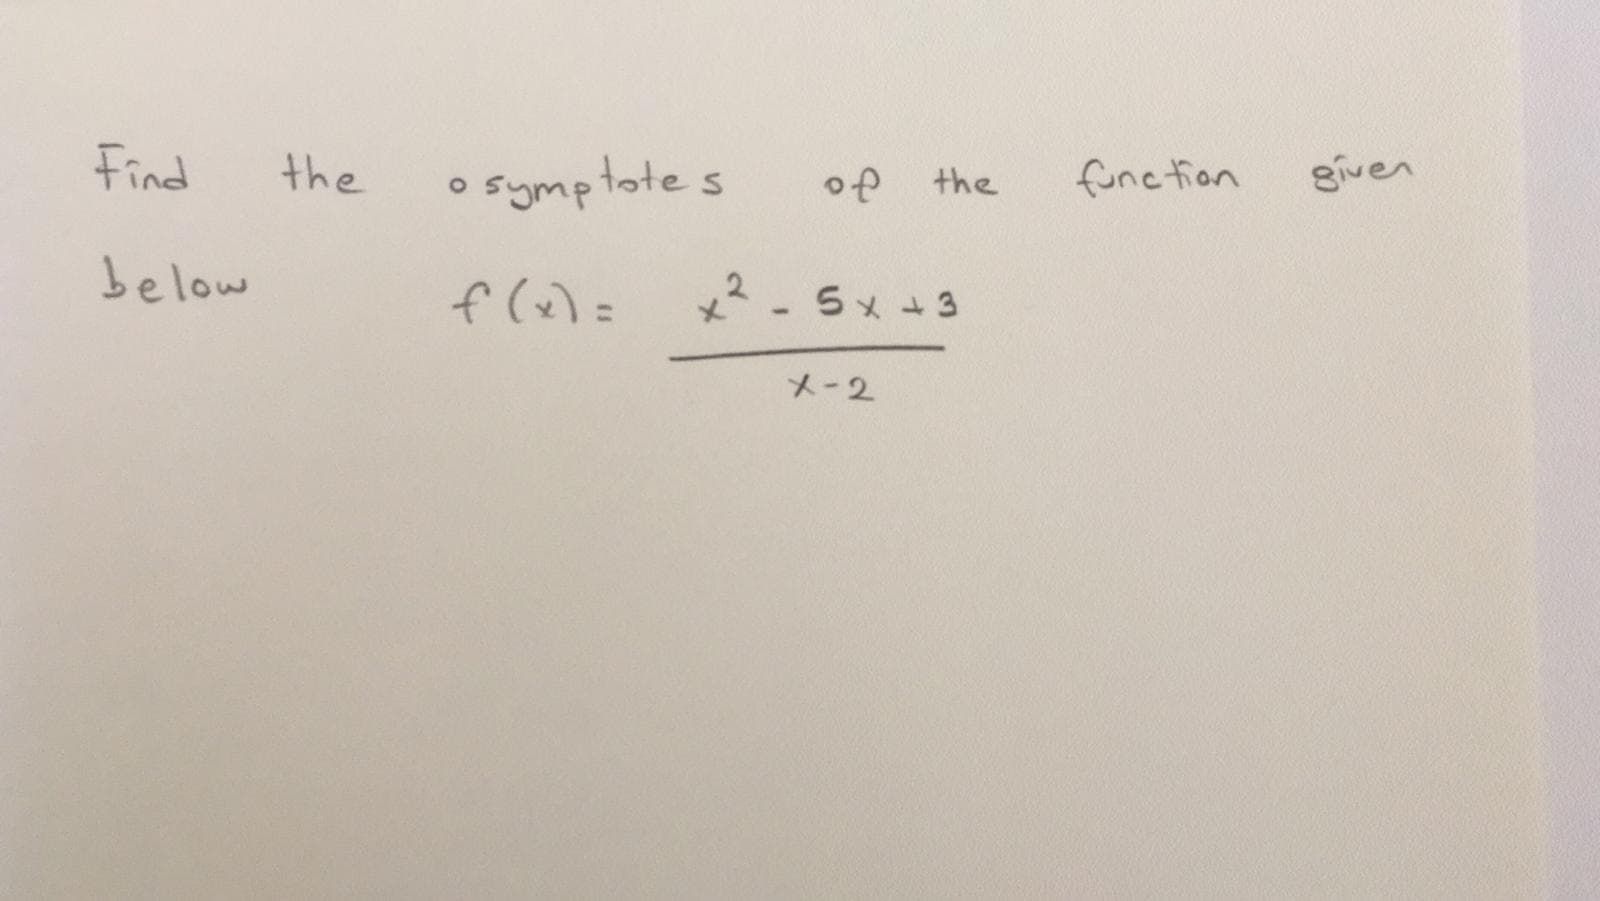 Find
the
o symptote s
func tion
given
of
the
below
f (x)=
2-5x+3
メ-2
